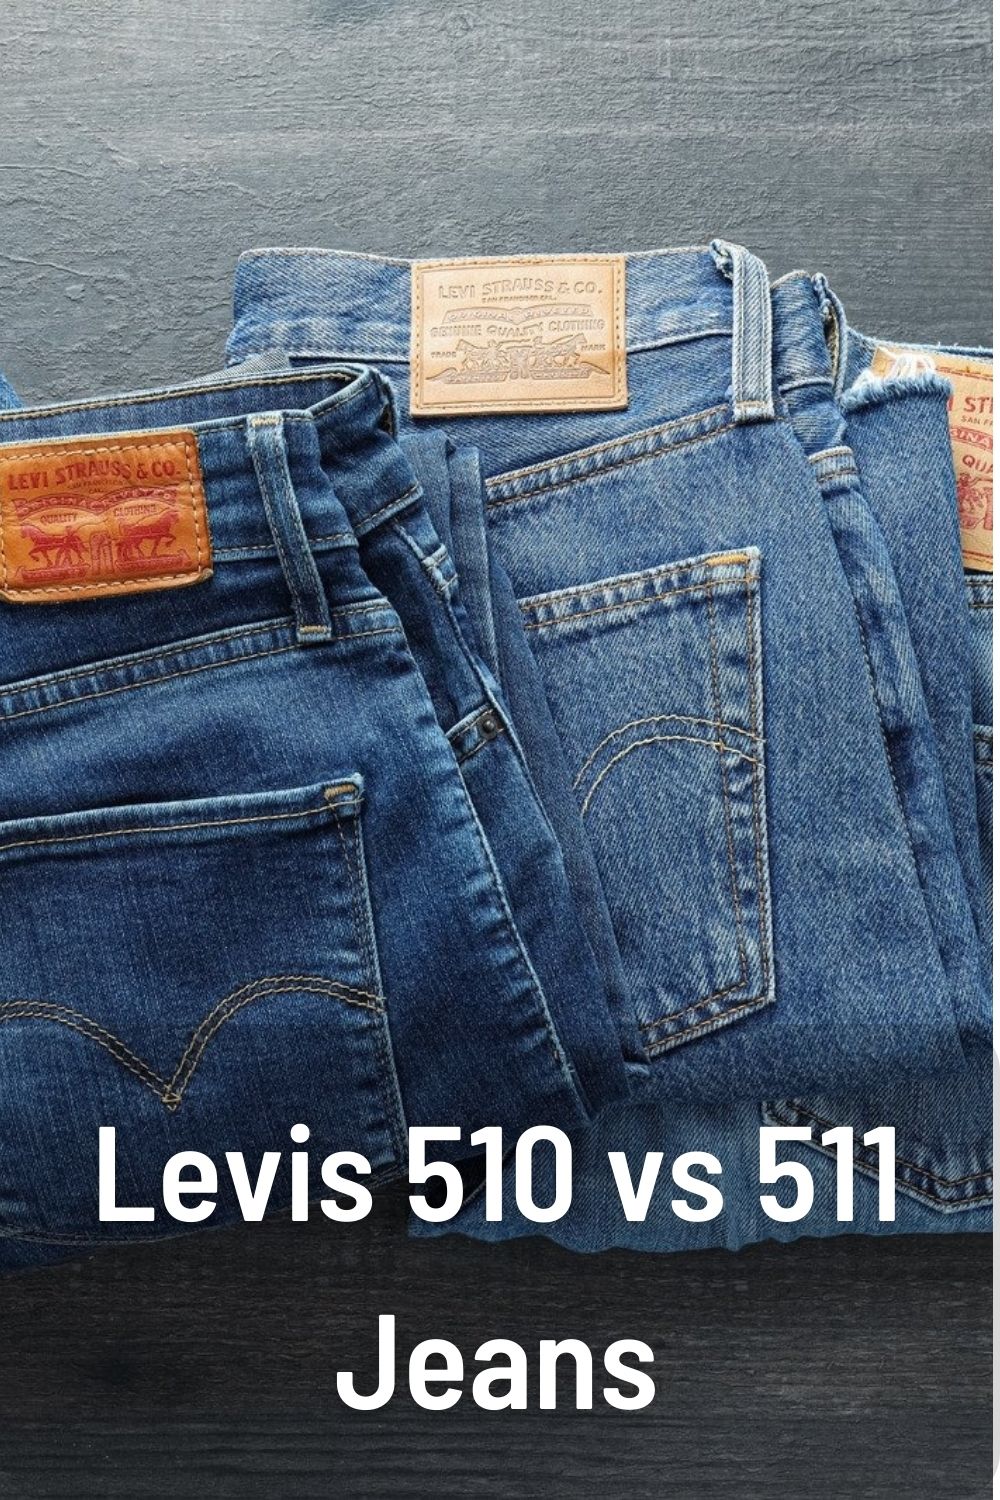 Levis 510 vs 511 Jeans: Differences Between Them